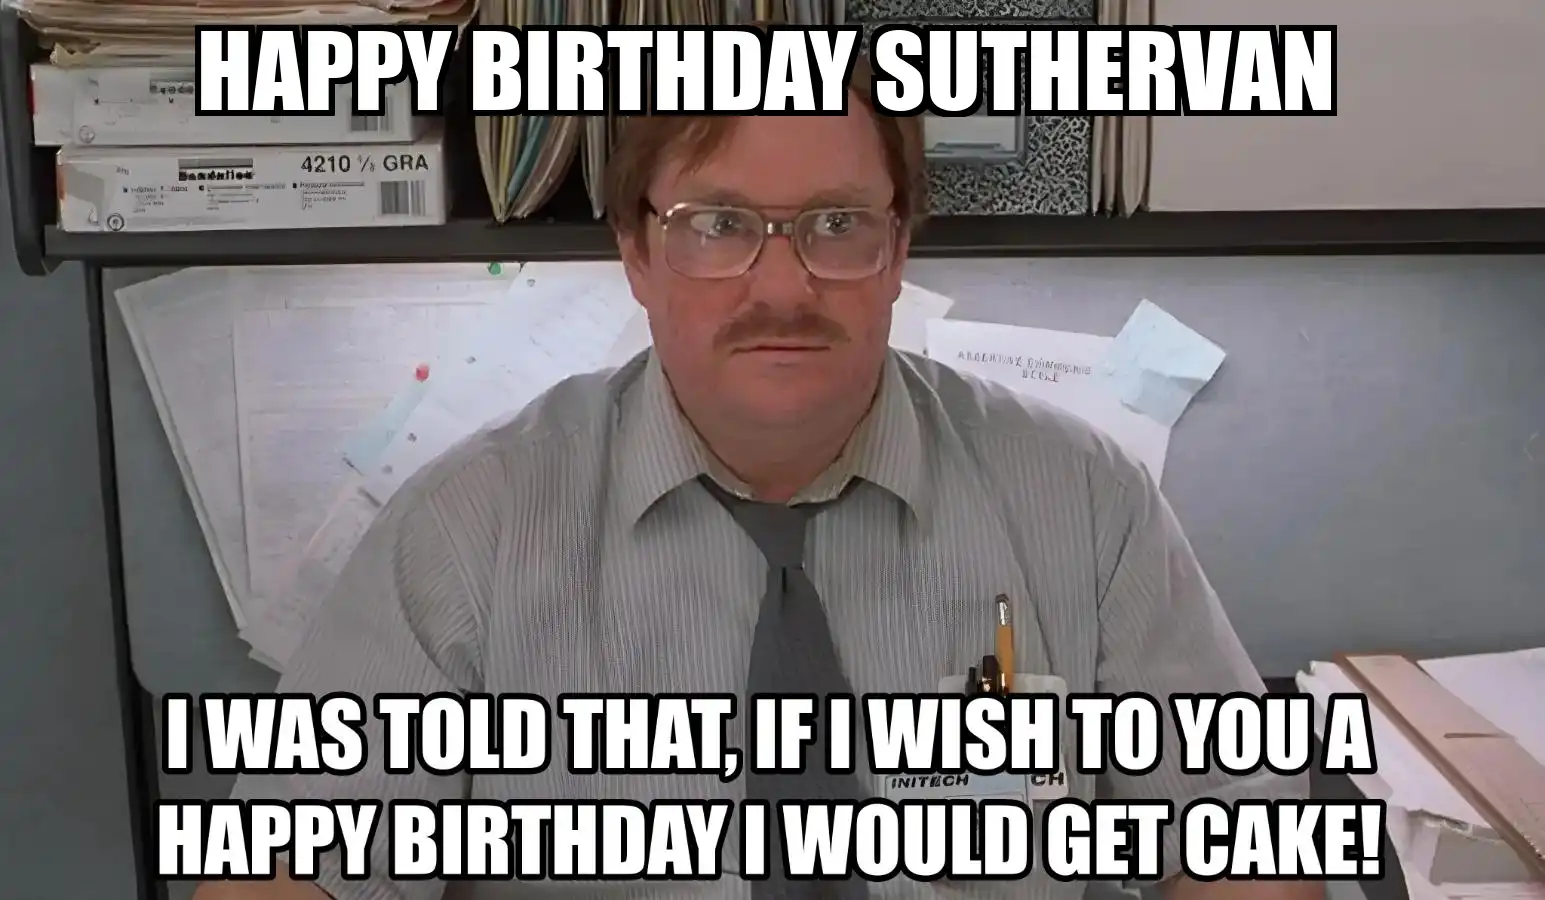 Happy Birthday Suthervan I Would Get A Cake Meme